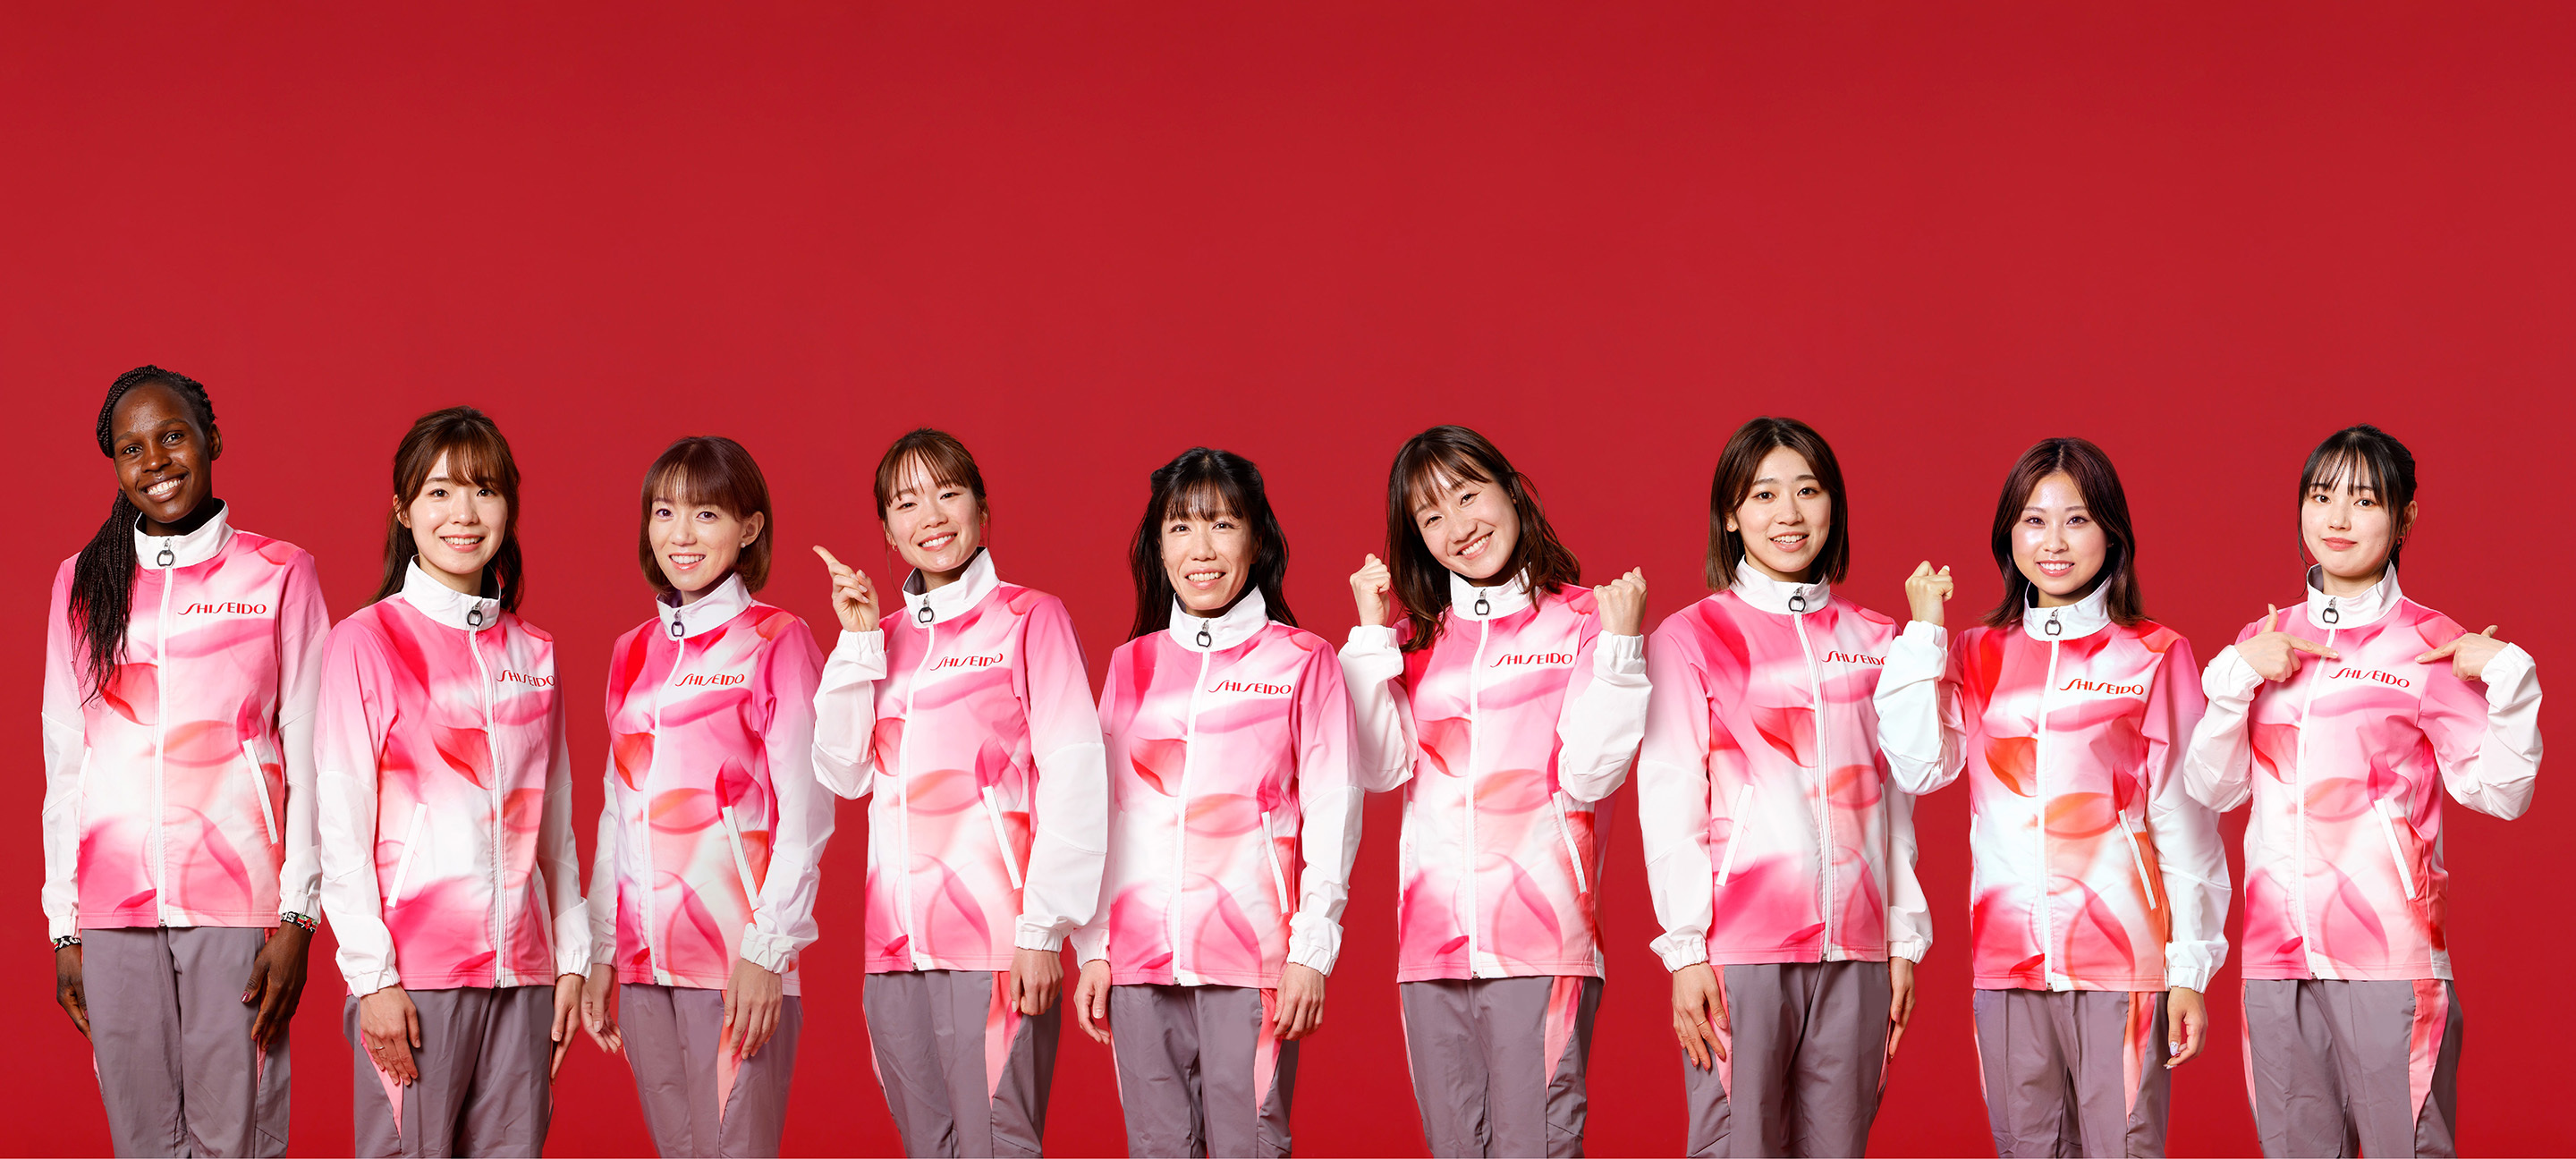 Shiseido's support for sports